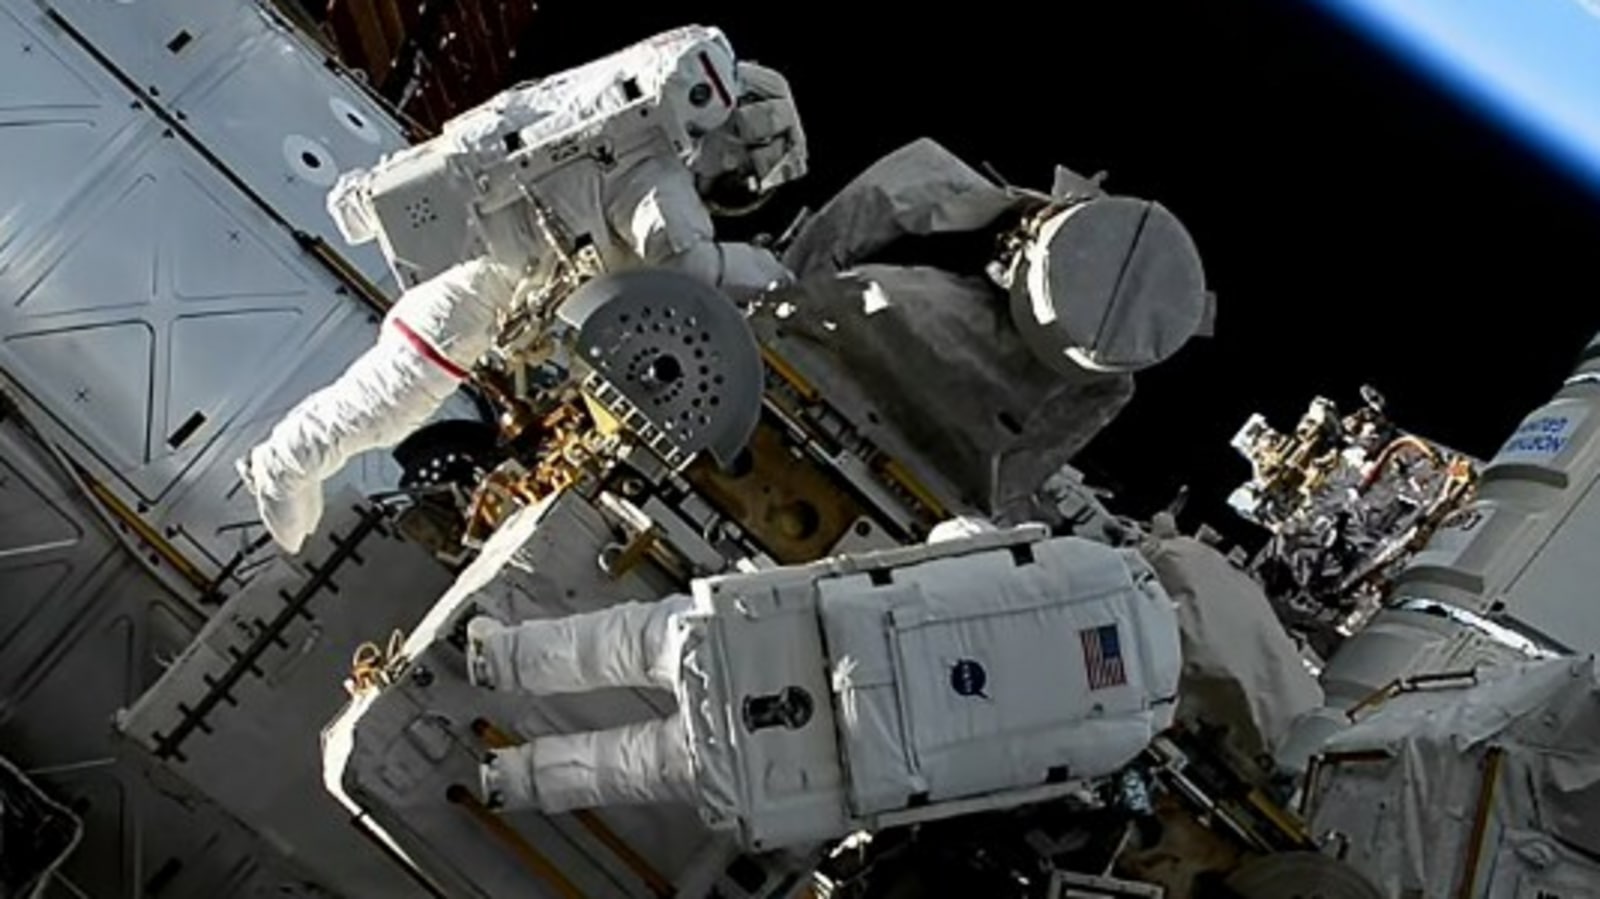 NASA astronauts drop tool bag during ISS spacewalk, you can see it from Earth